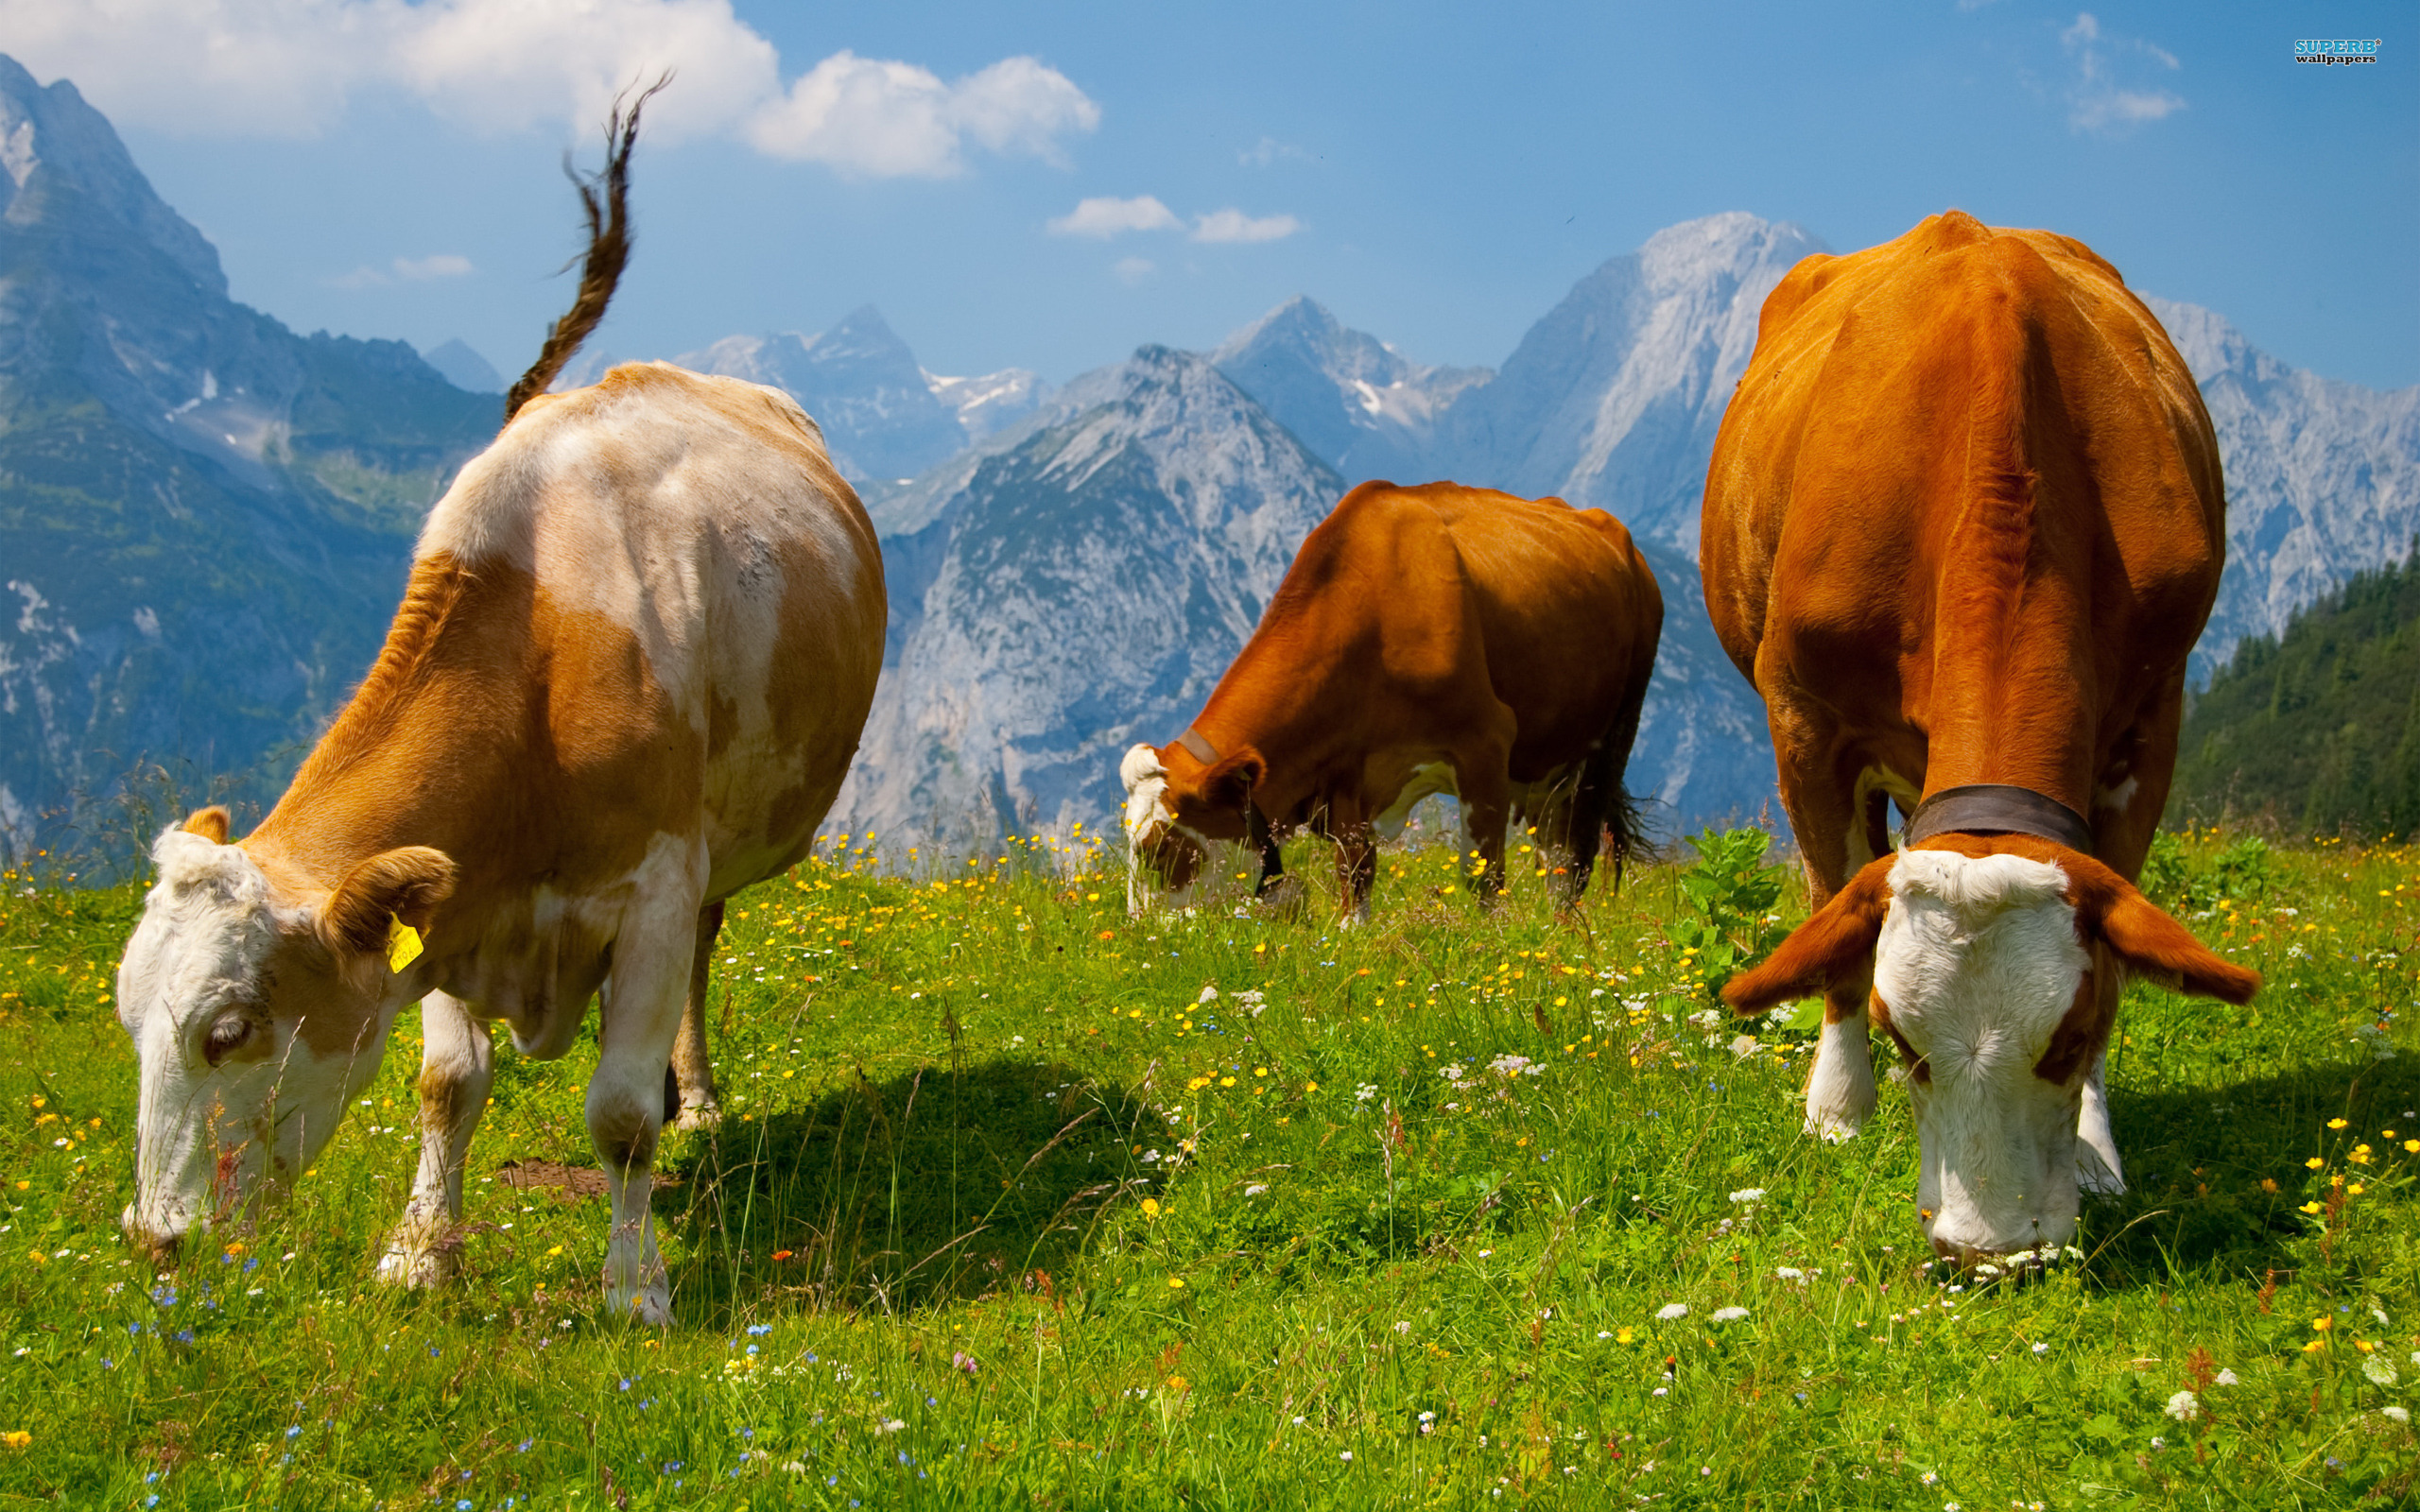 Cow HD Wallpaper For Pc Amazing Wallpaperz